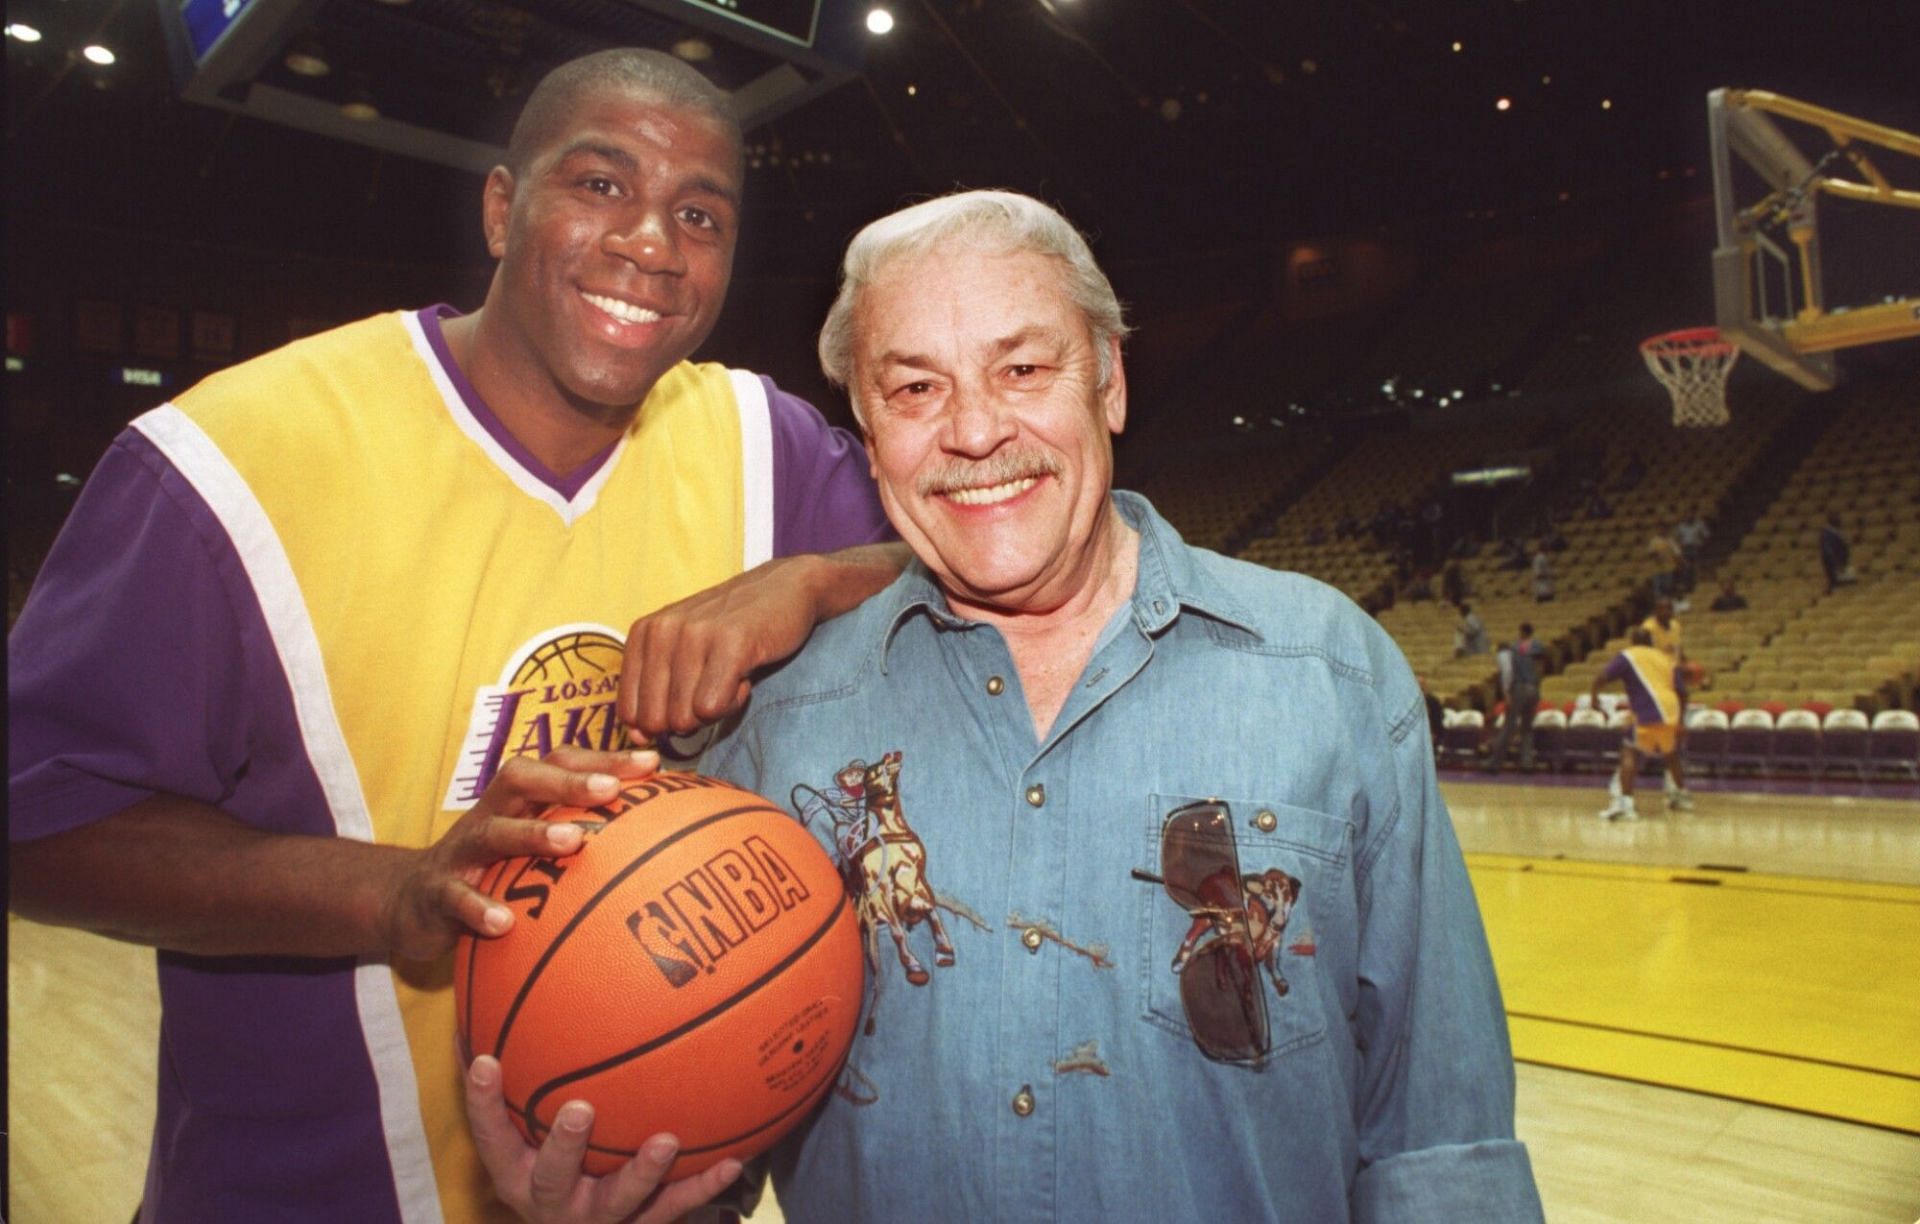 The late Dr. Jerry Buss and former Lakers superstar Magic Johnson